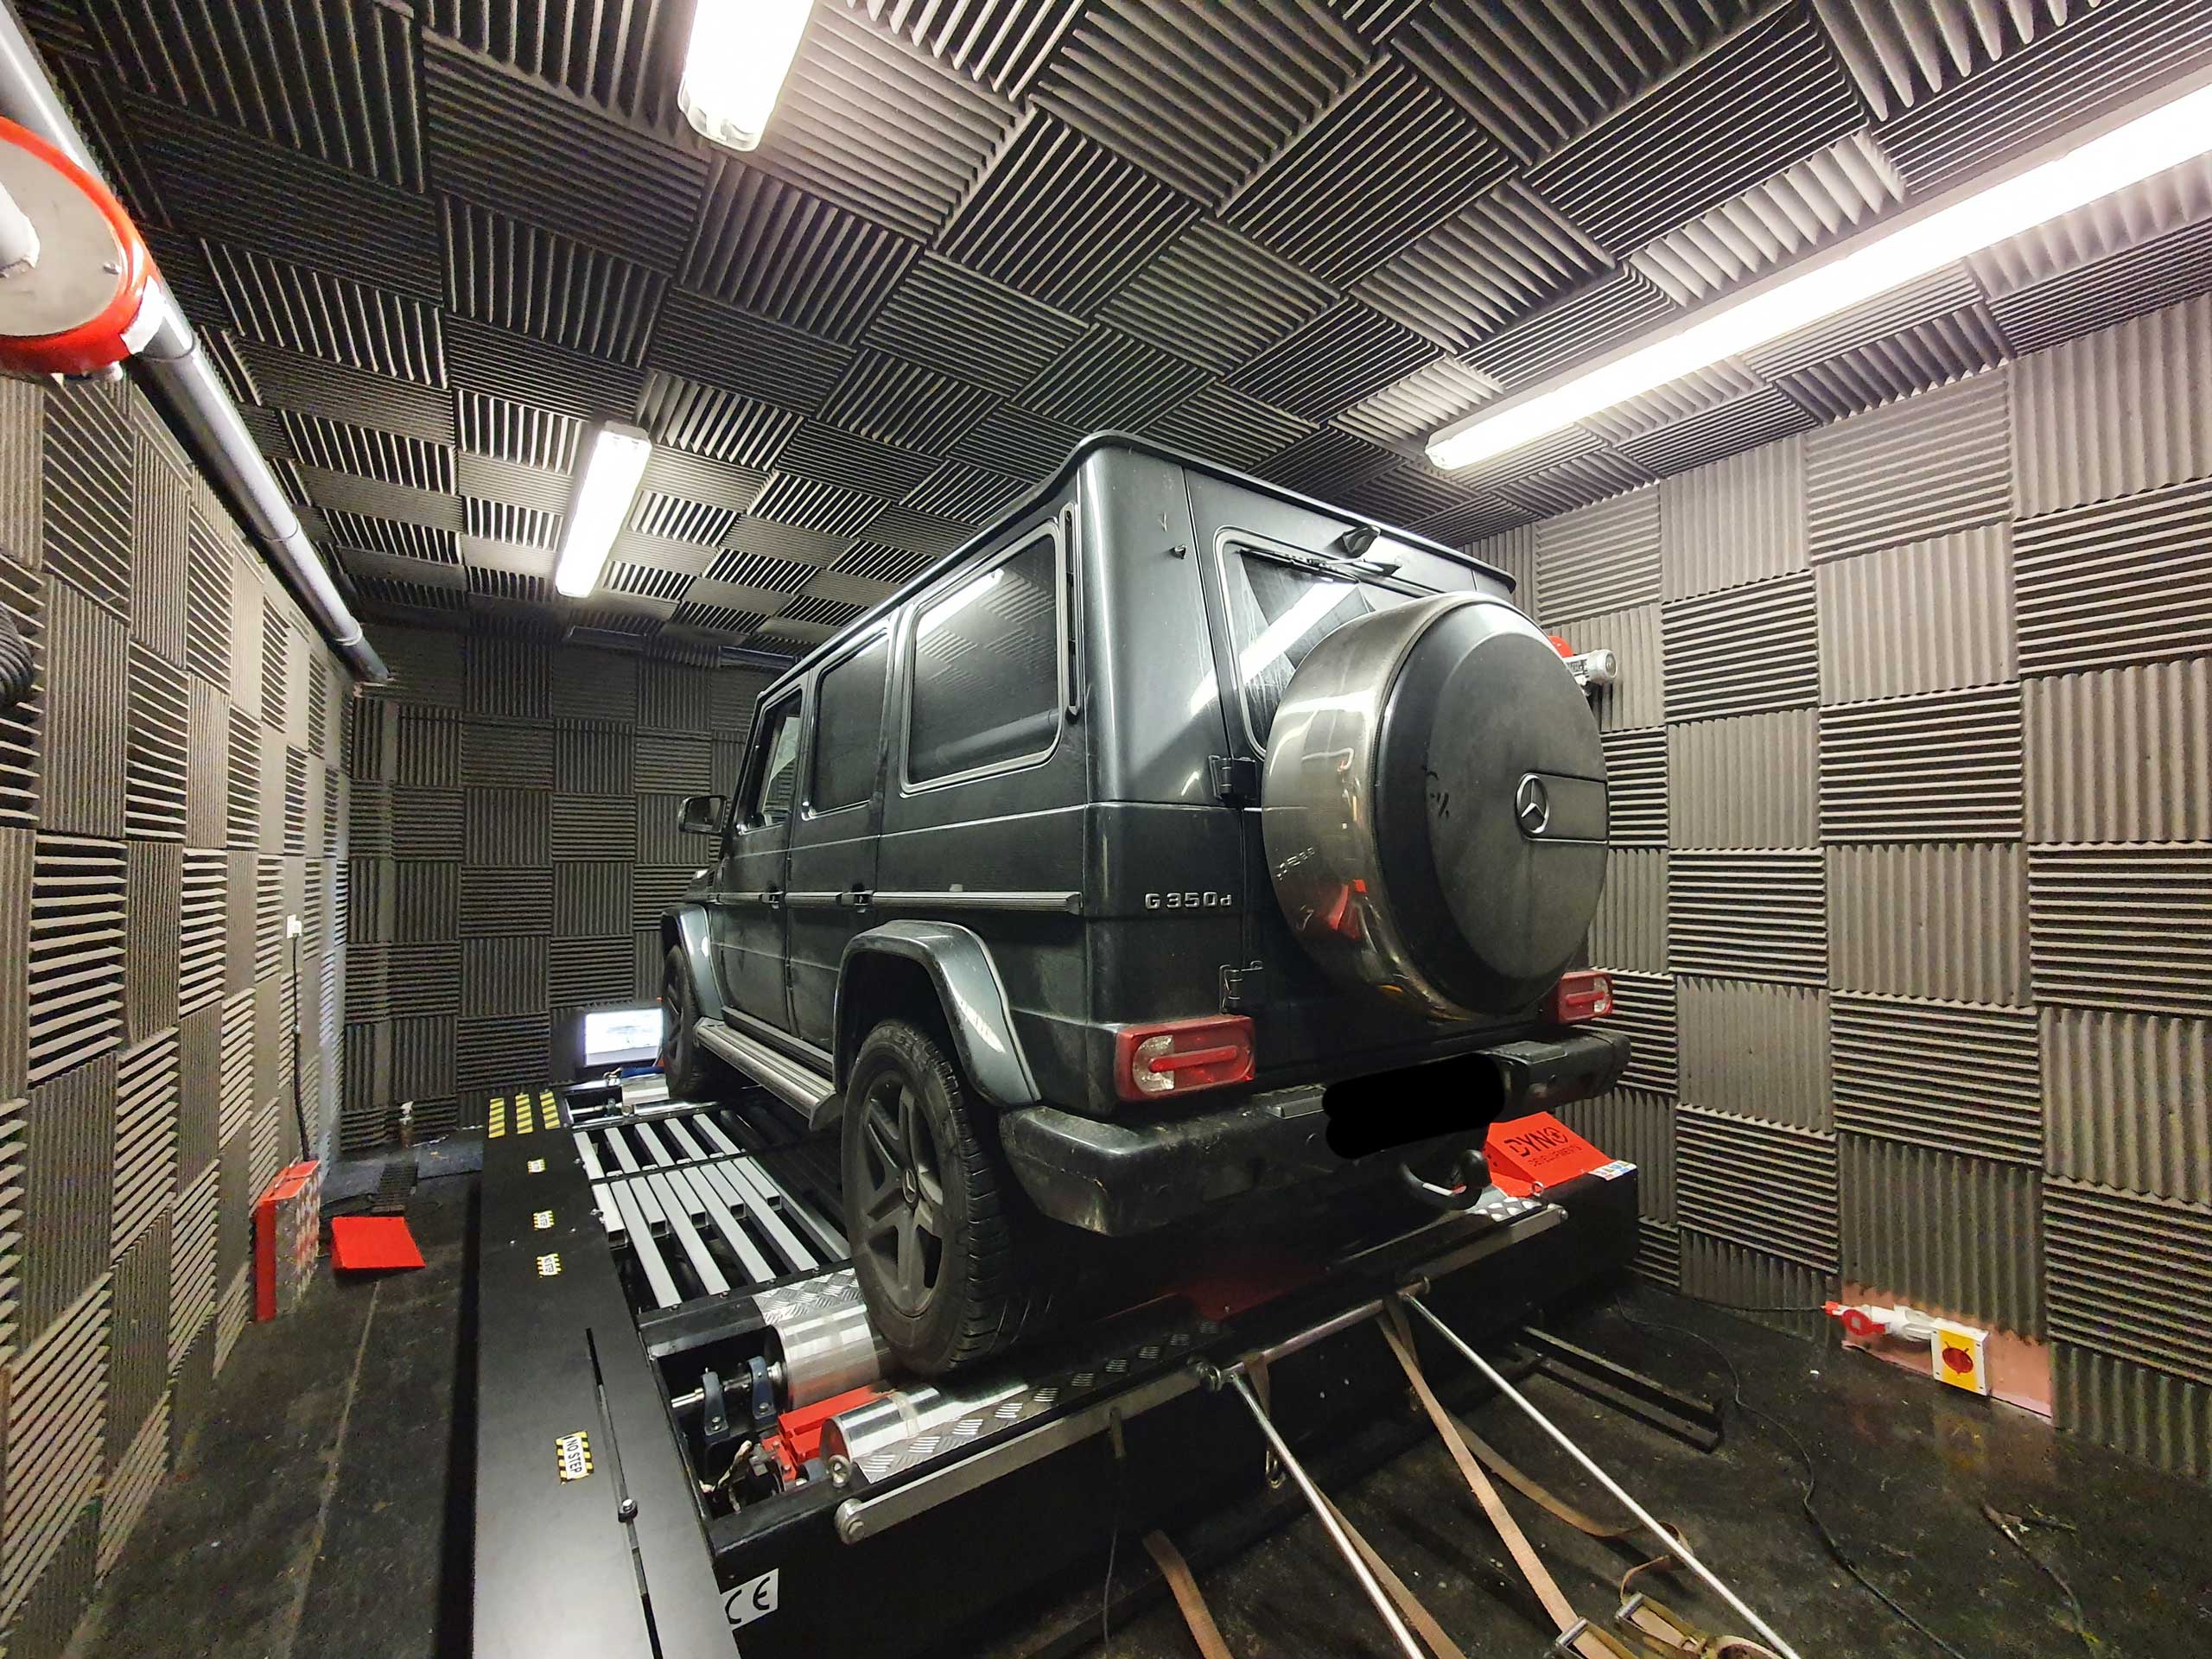 Mercedes G Wagon rolling road remapping from GAD tuning Essex London